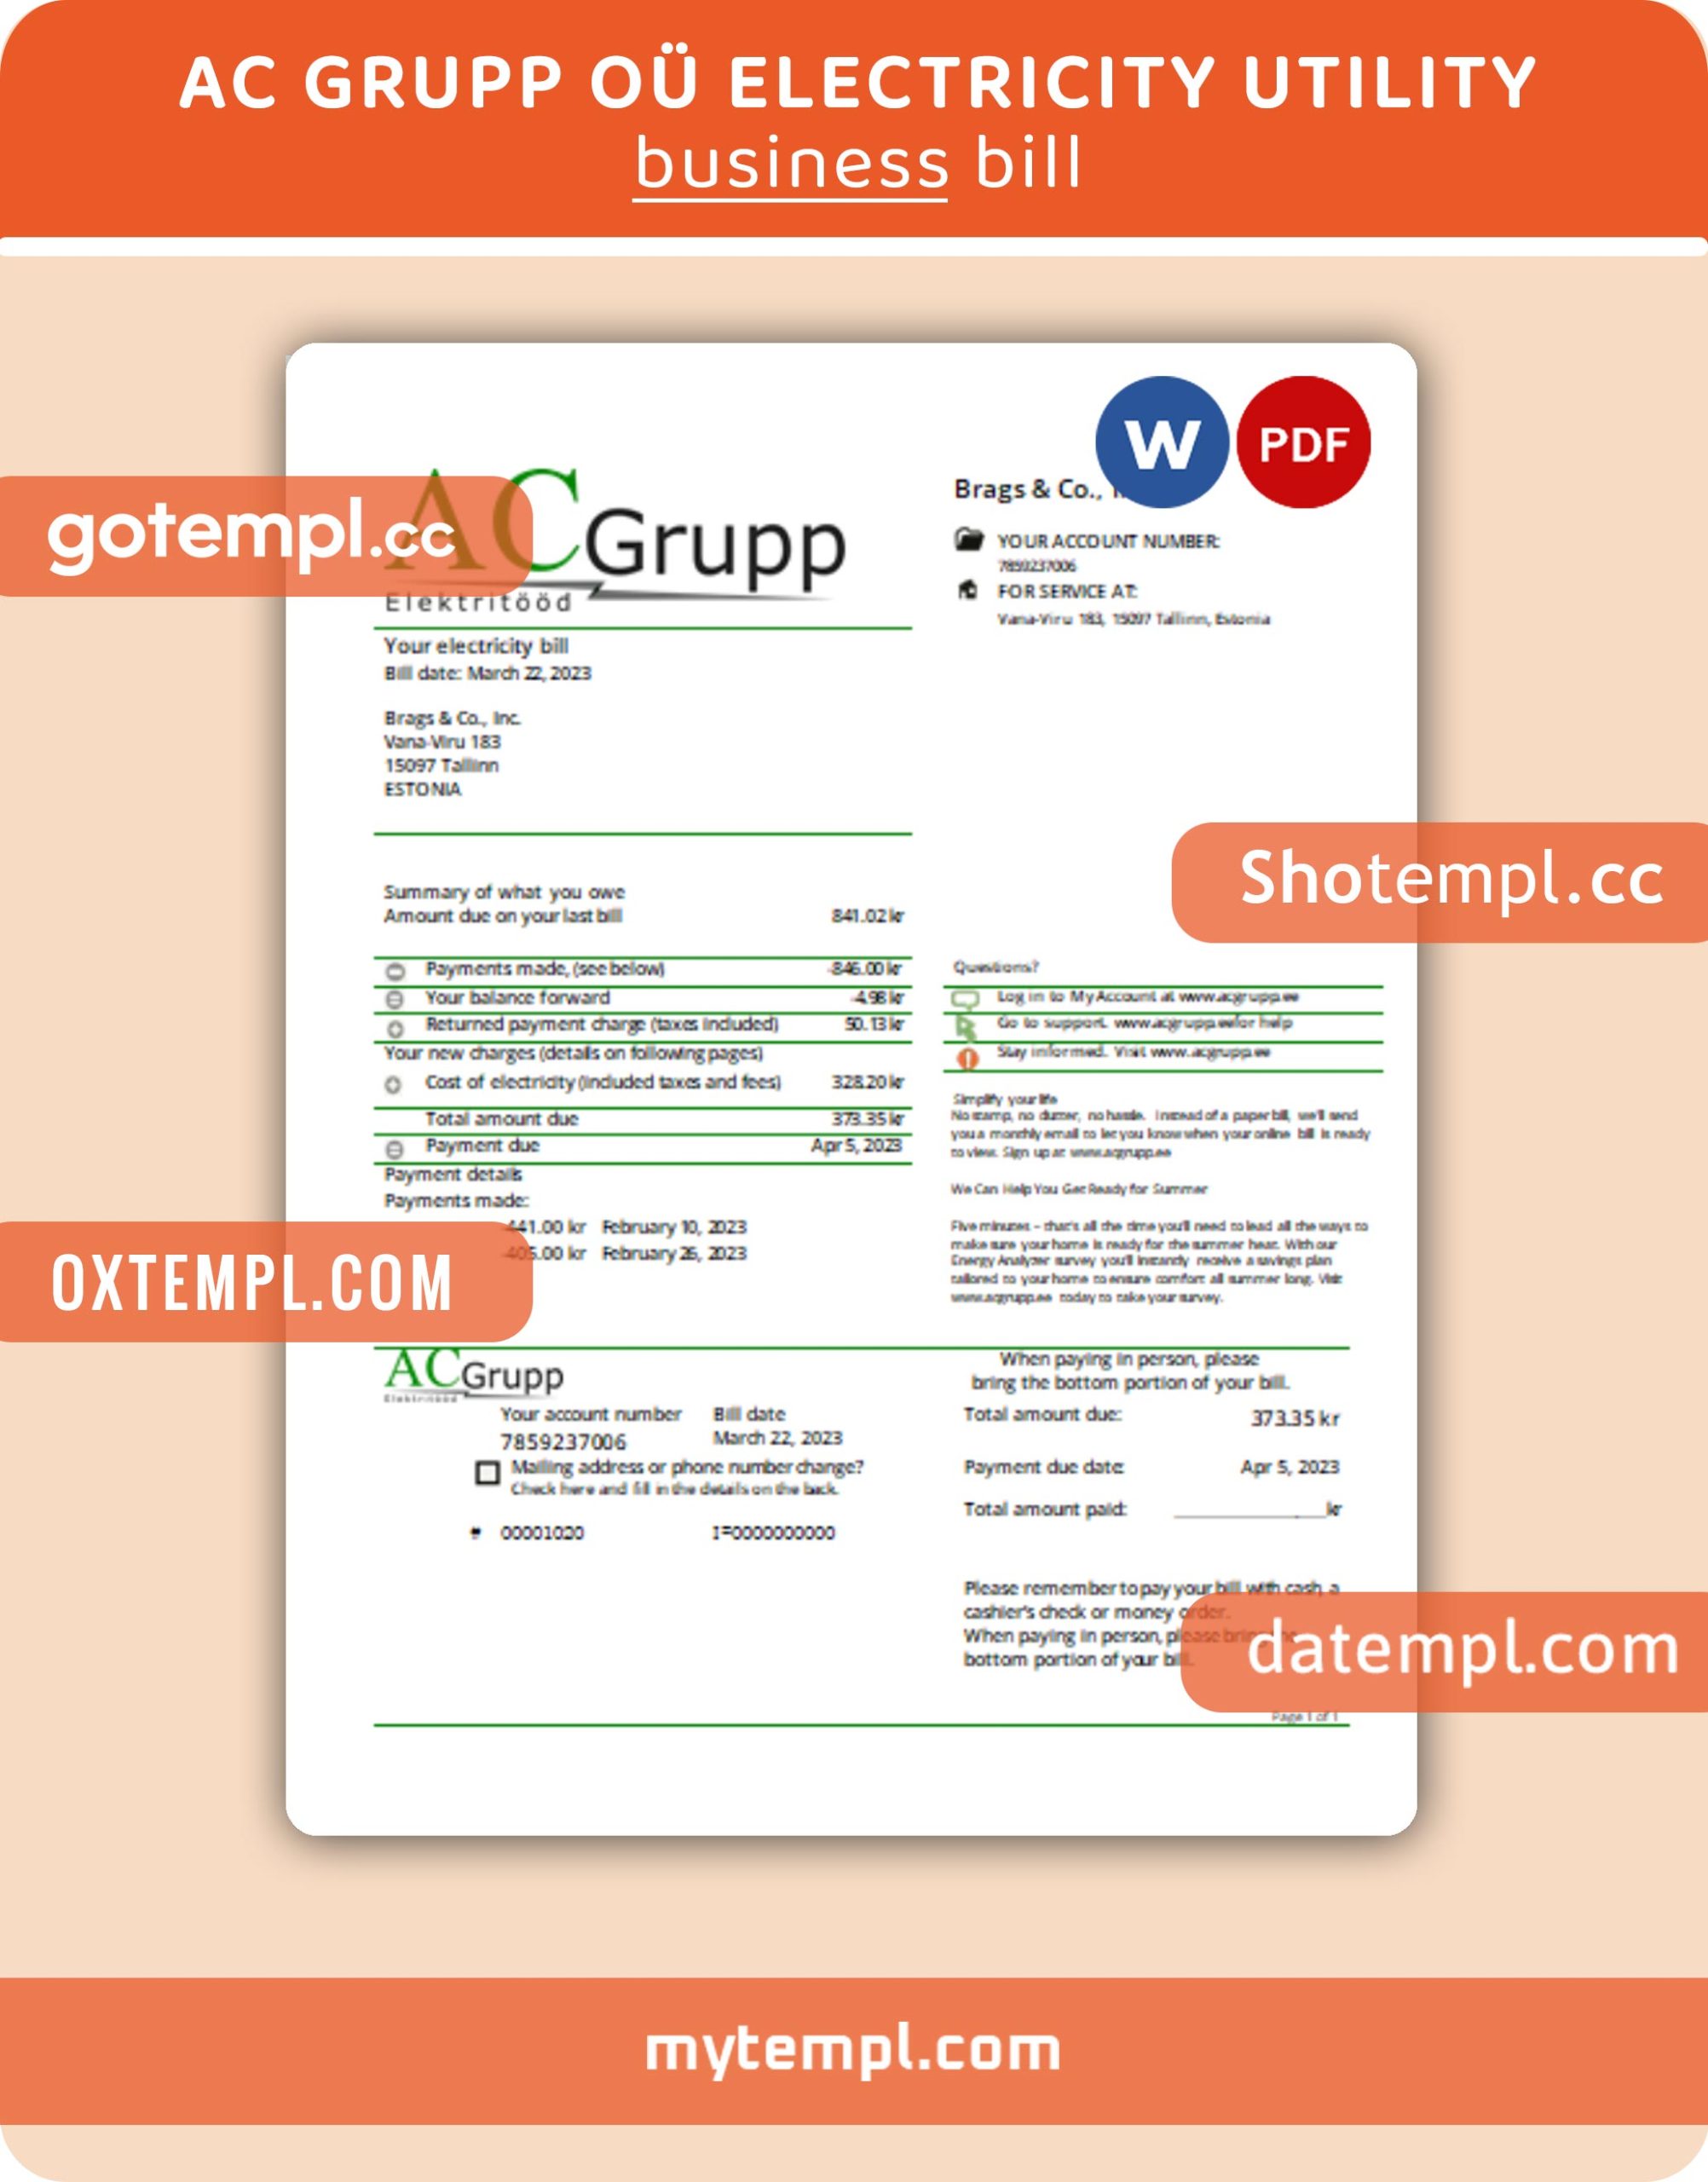 AC Grupp OÃœ electricity business utility bill,PDF and WORD template